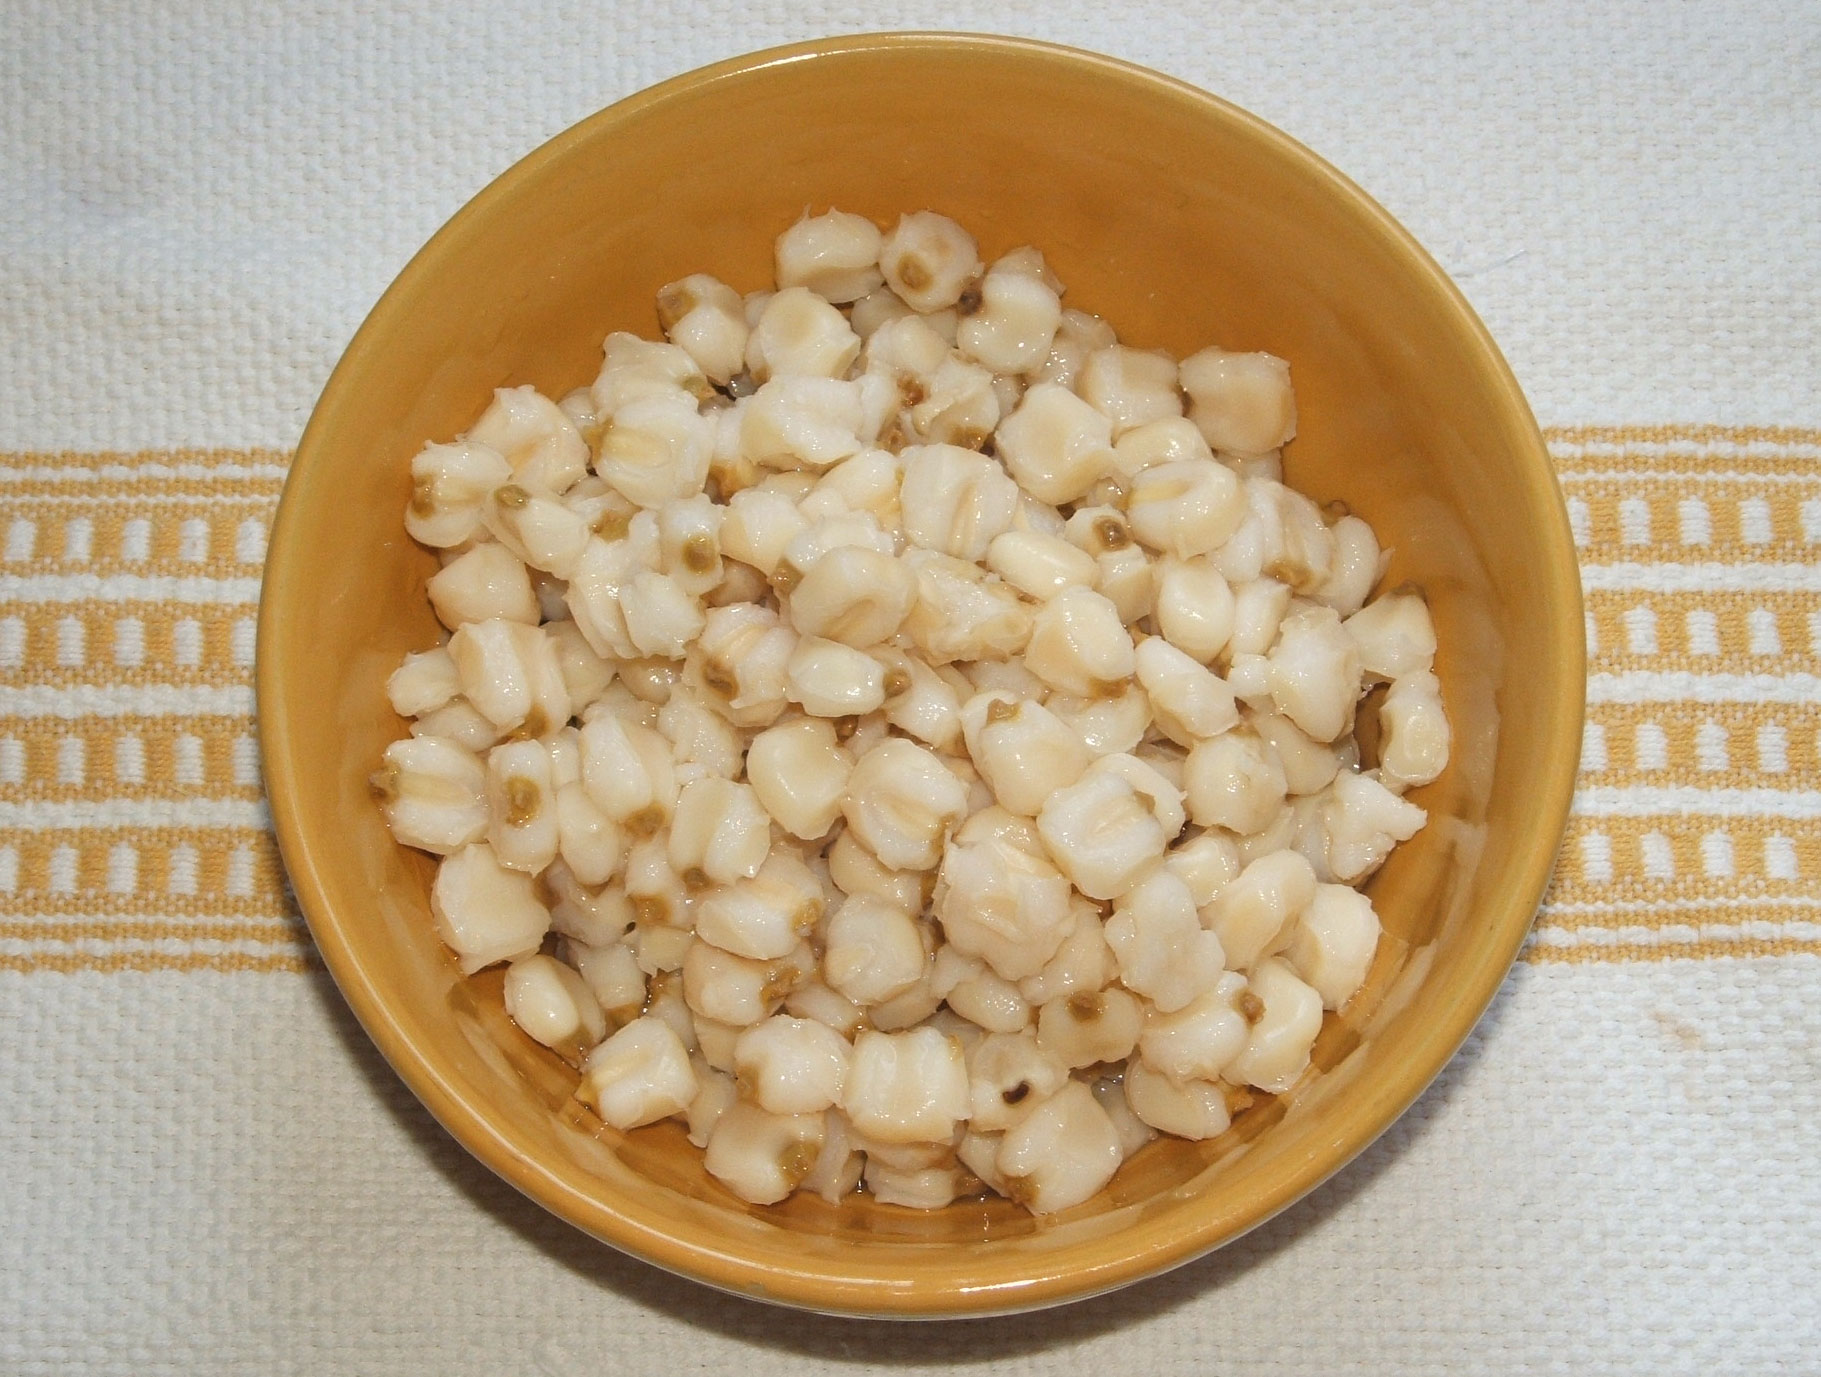 Photograph of hominy. The photo shows hominy, wet, white maize kernels, in a tan bowl sitting on a white cloth with a yellow-striped pattern on it. 